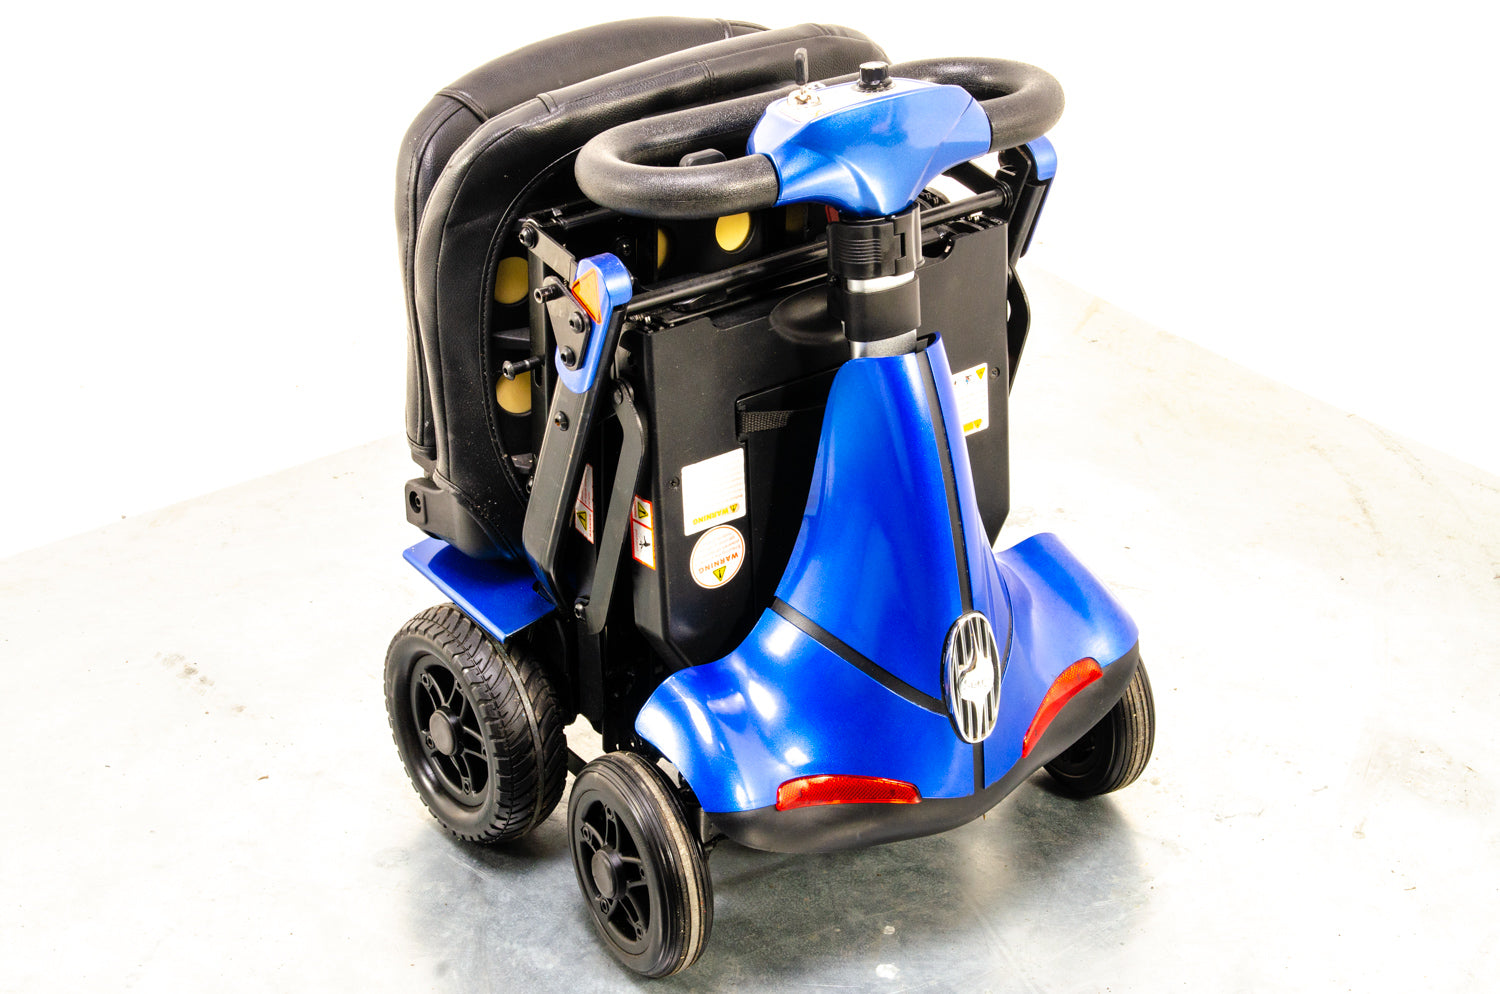 Monarch Mobie 4mph Folding Used Mobility Scooter Lithium Travel Small Travel Blue 13350